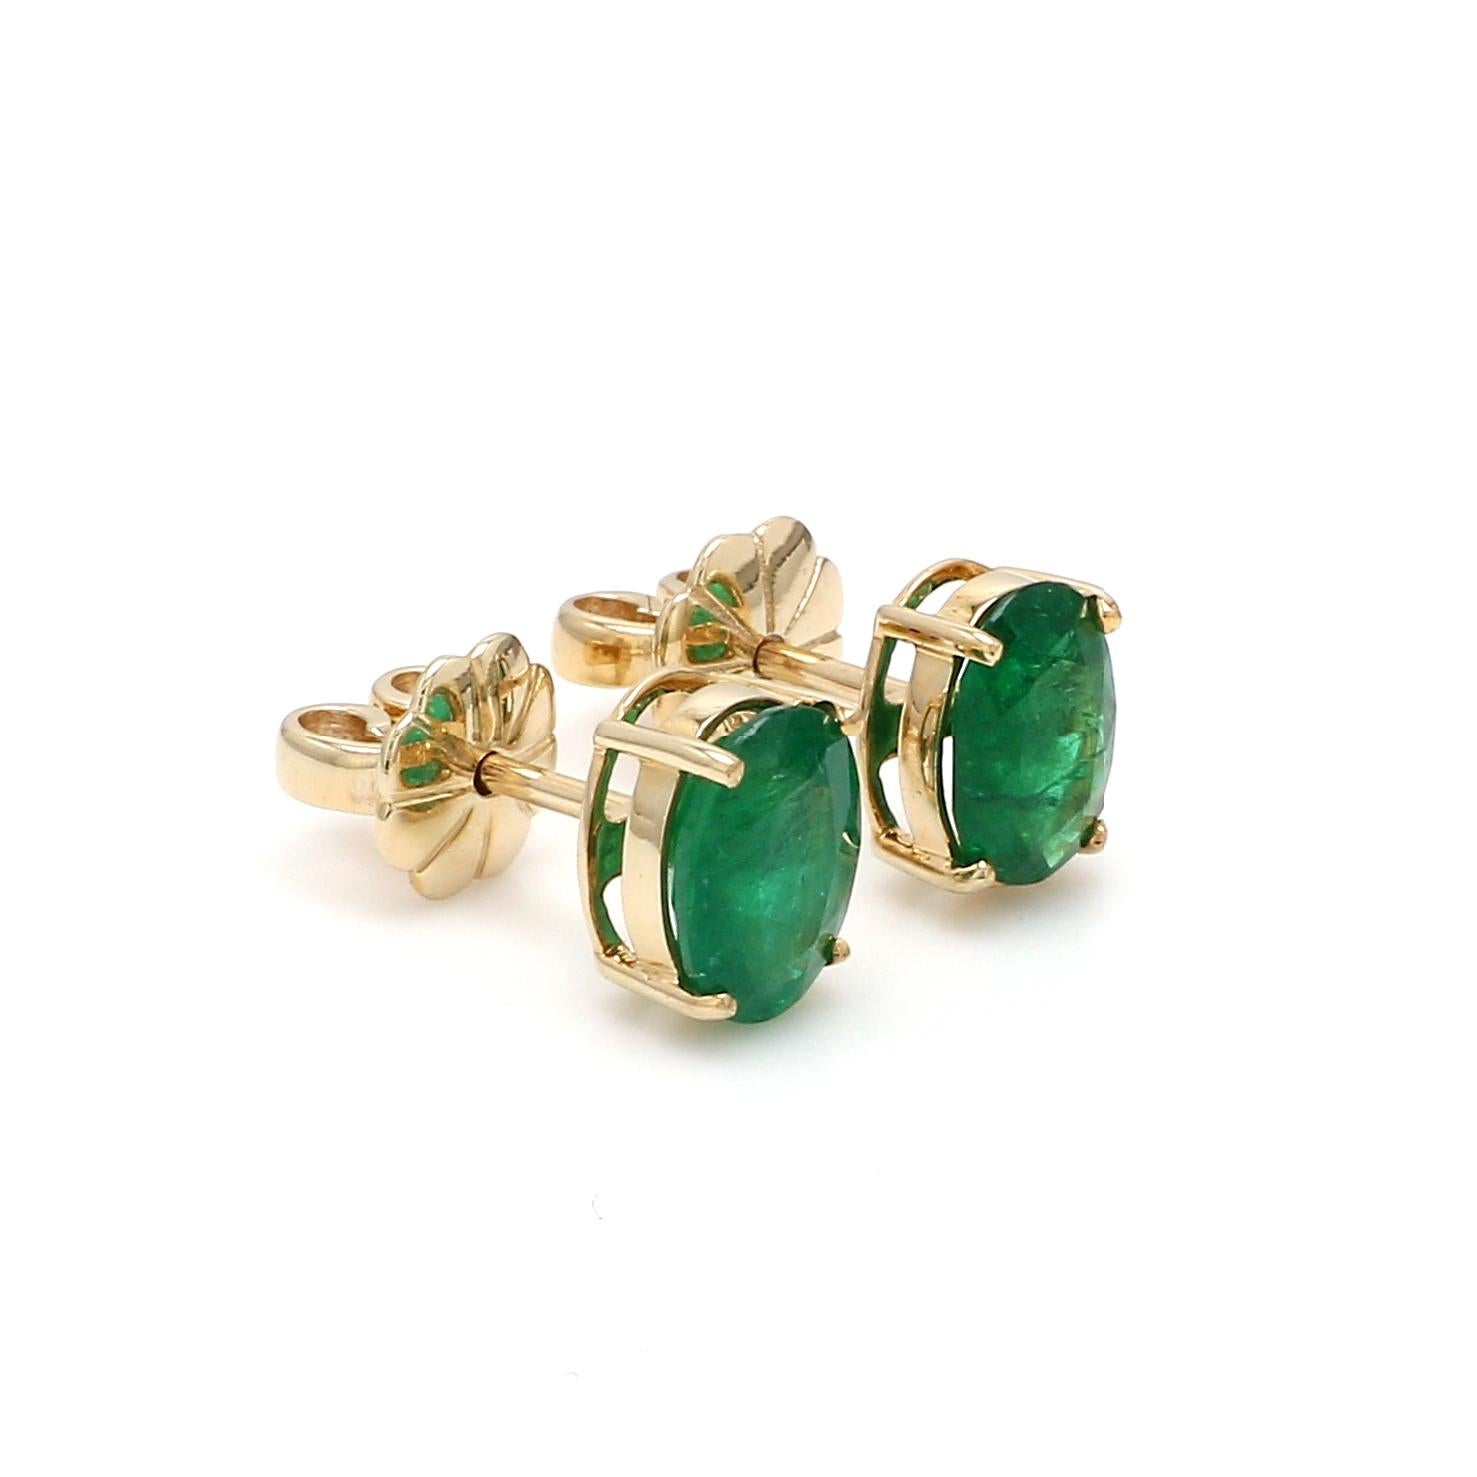 Modern 2.05 Carat Oval Natural Emerald Gemstone Stud Earrings 18k Yellow Gold Jewelry For Sale